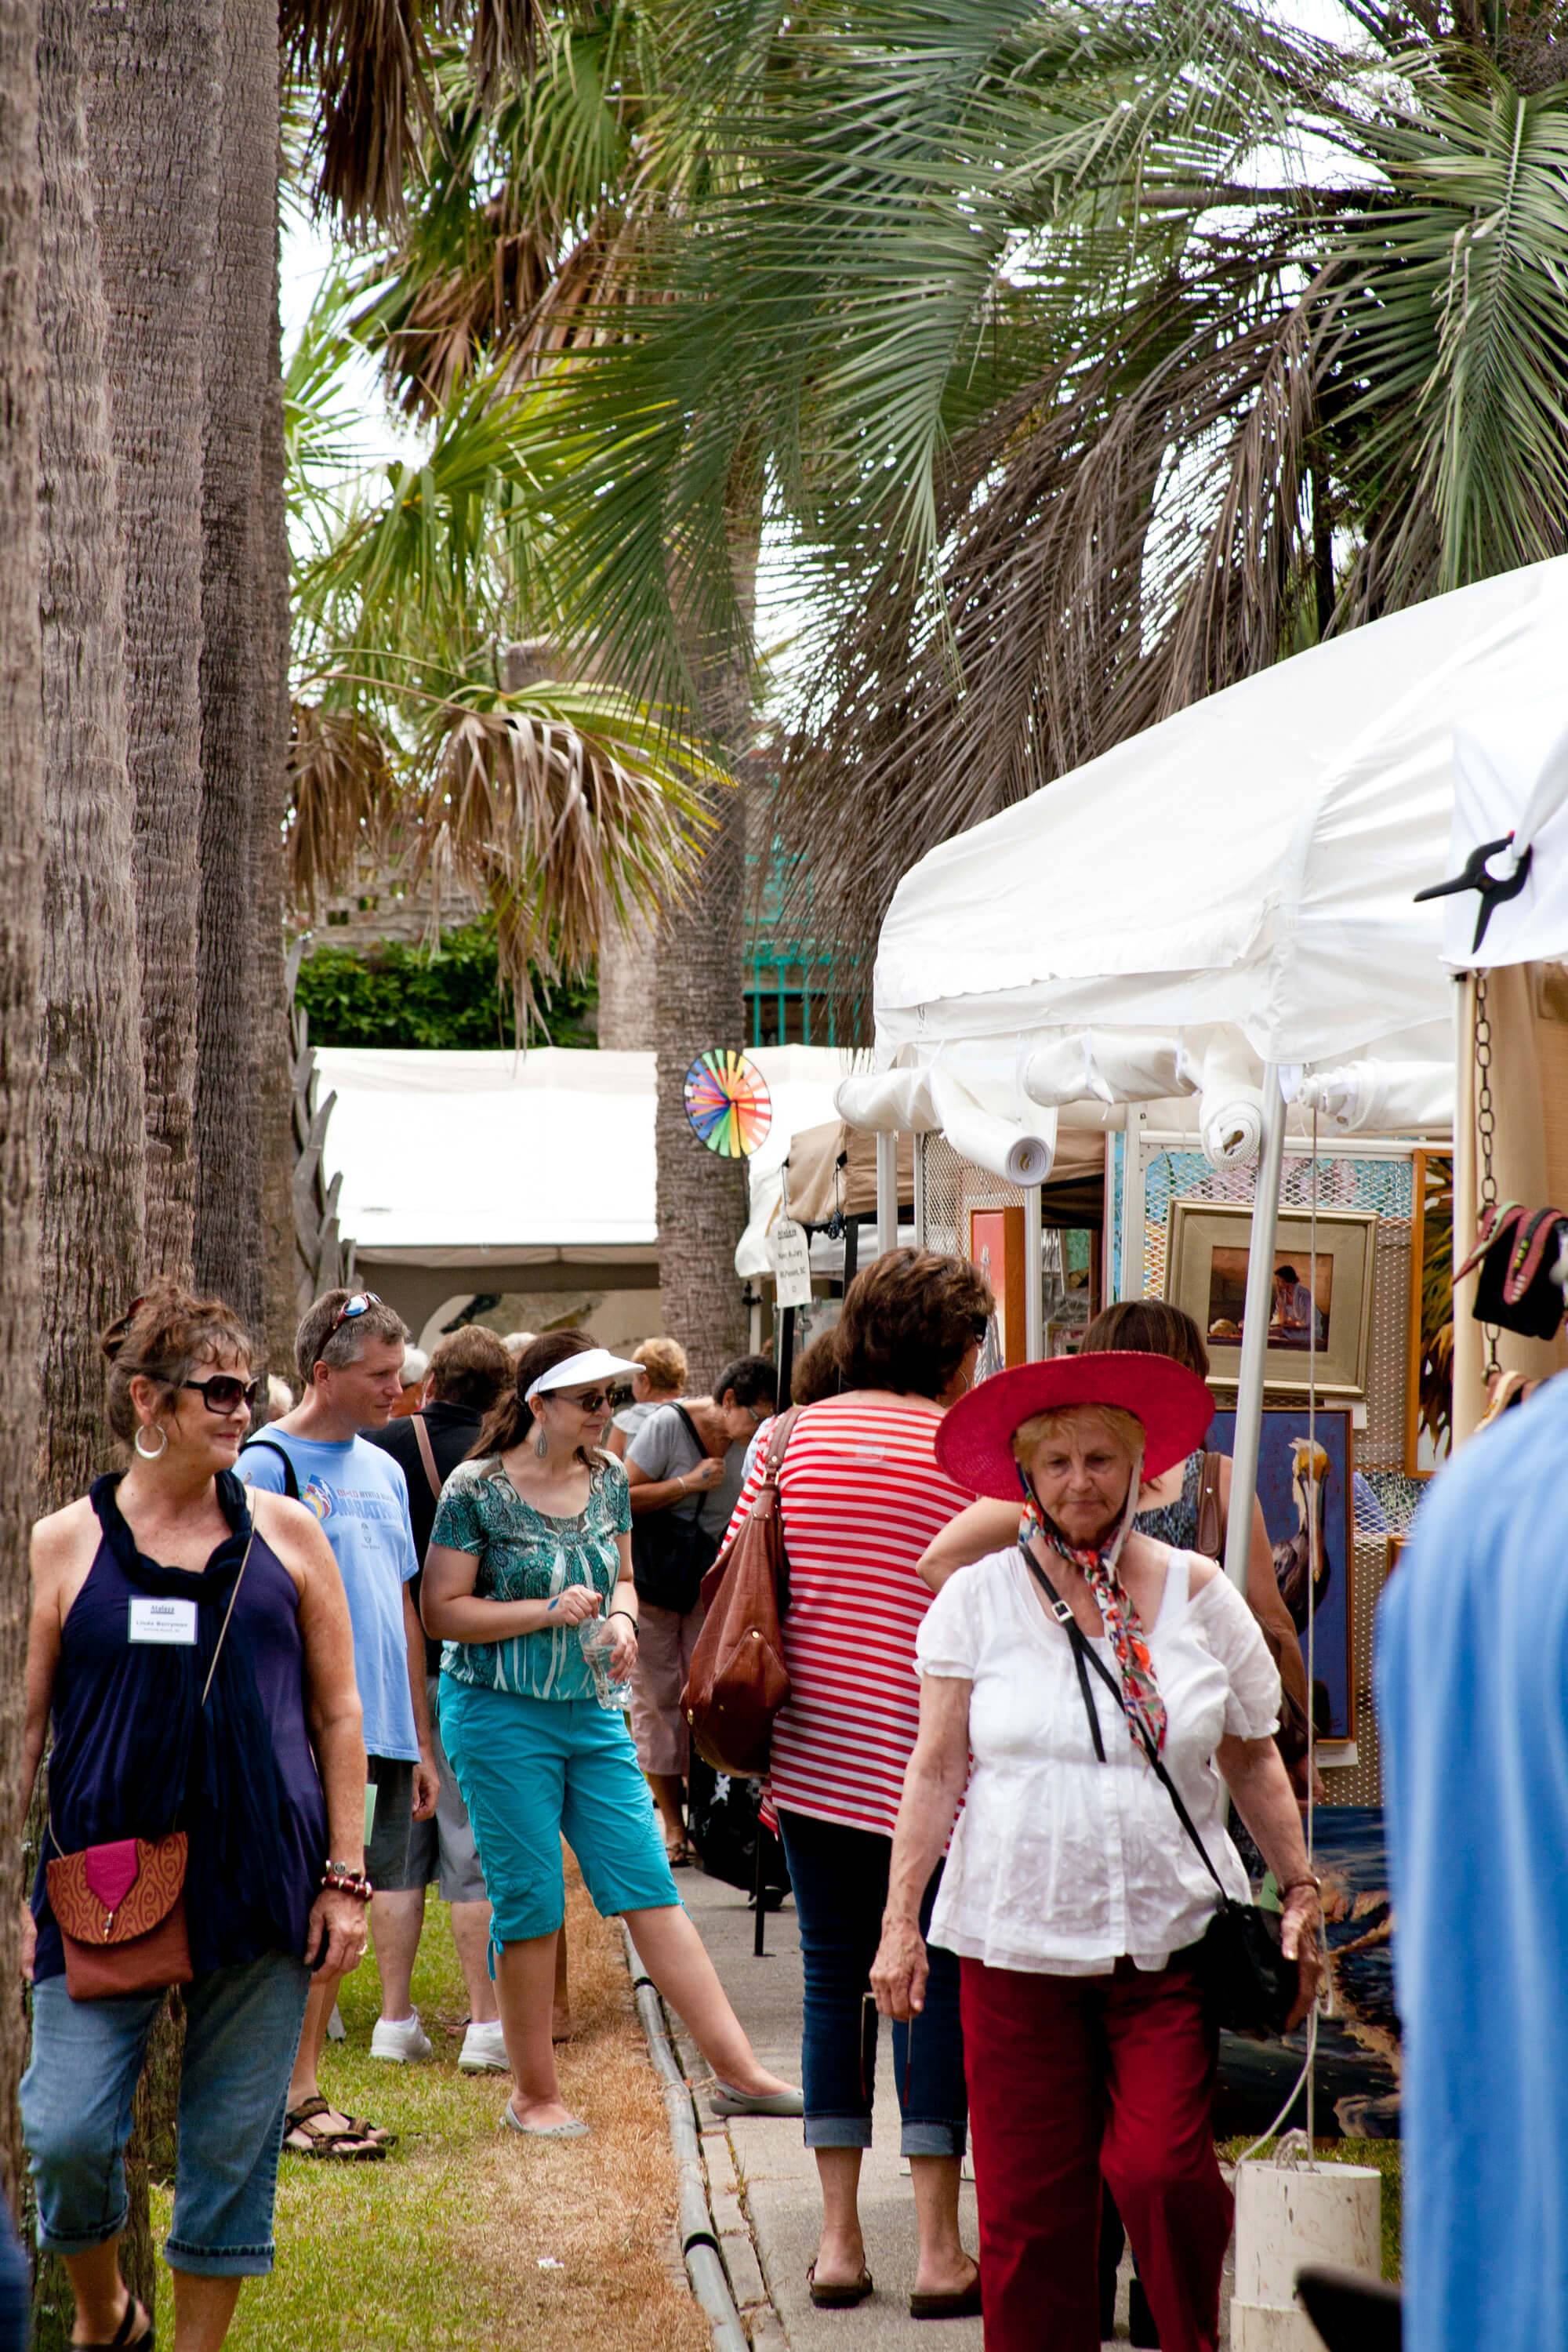 Atalaya Arts & Crafts Festival Offers Juried Art Show & More